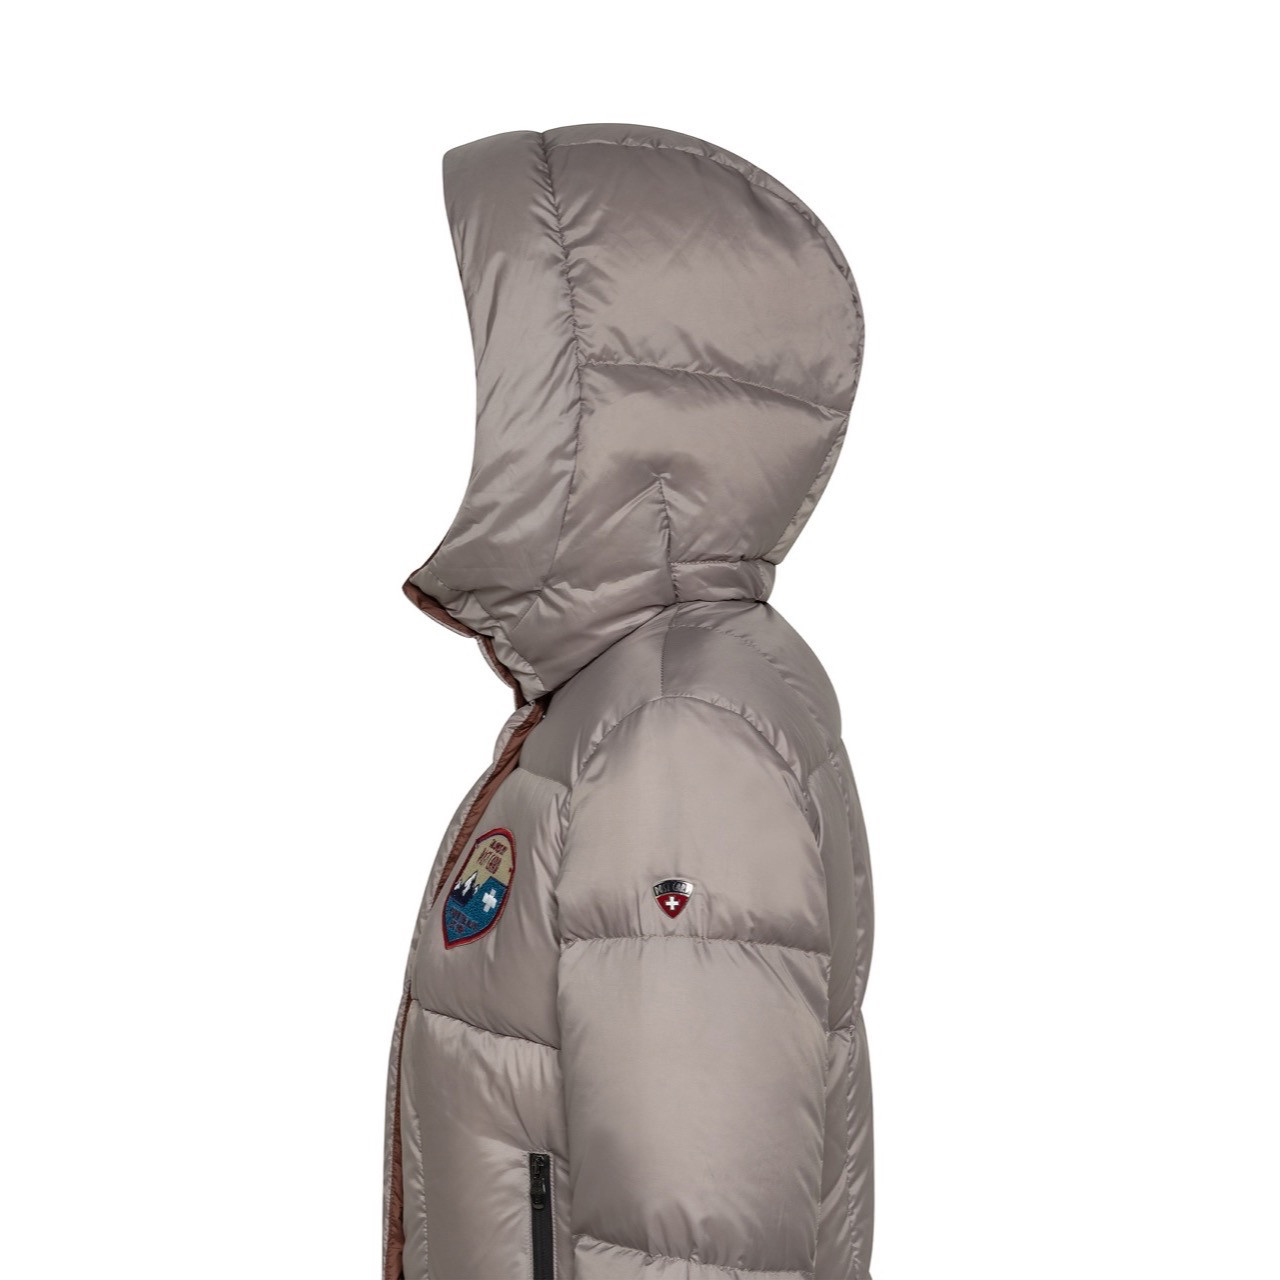  Post Card Winter Down Jacket Kean MQ Patch (Blue) (EU 40 / US  4) : Clothing, Shoes & Jewelry